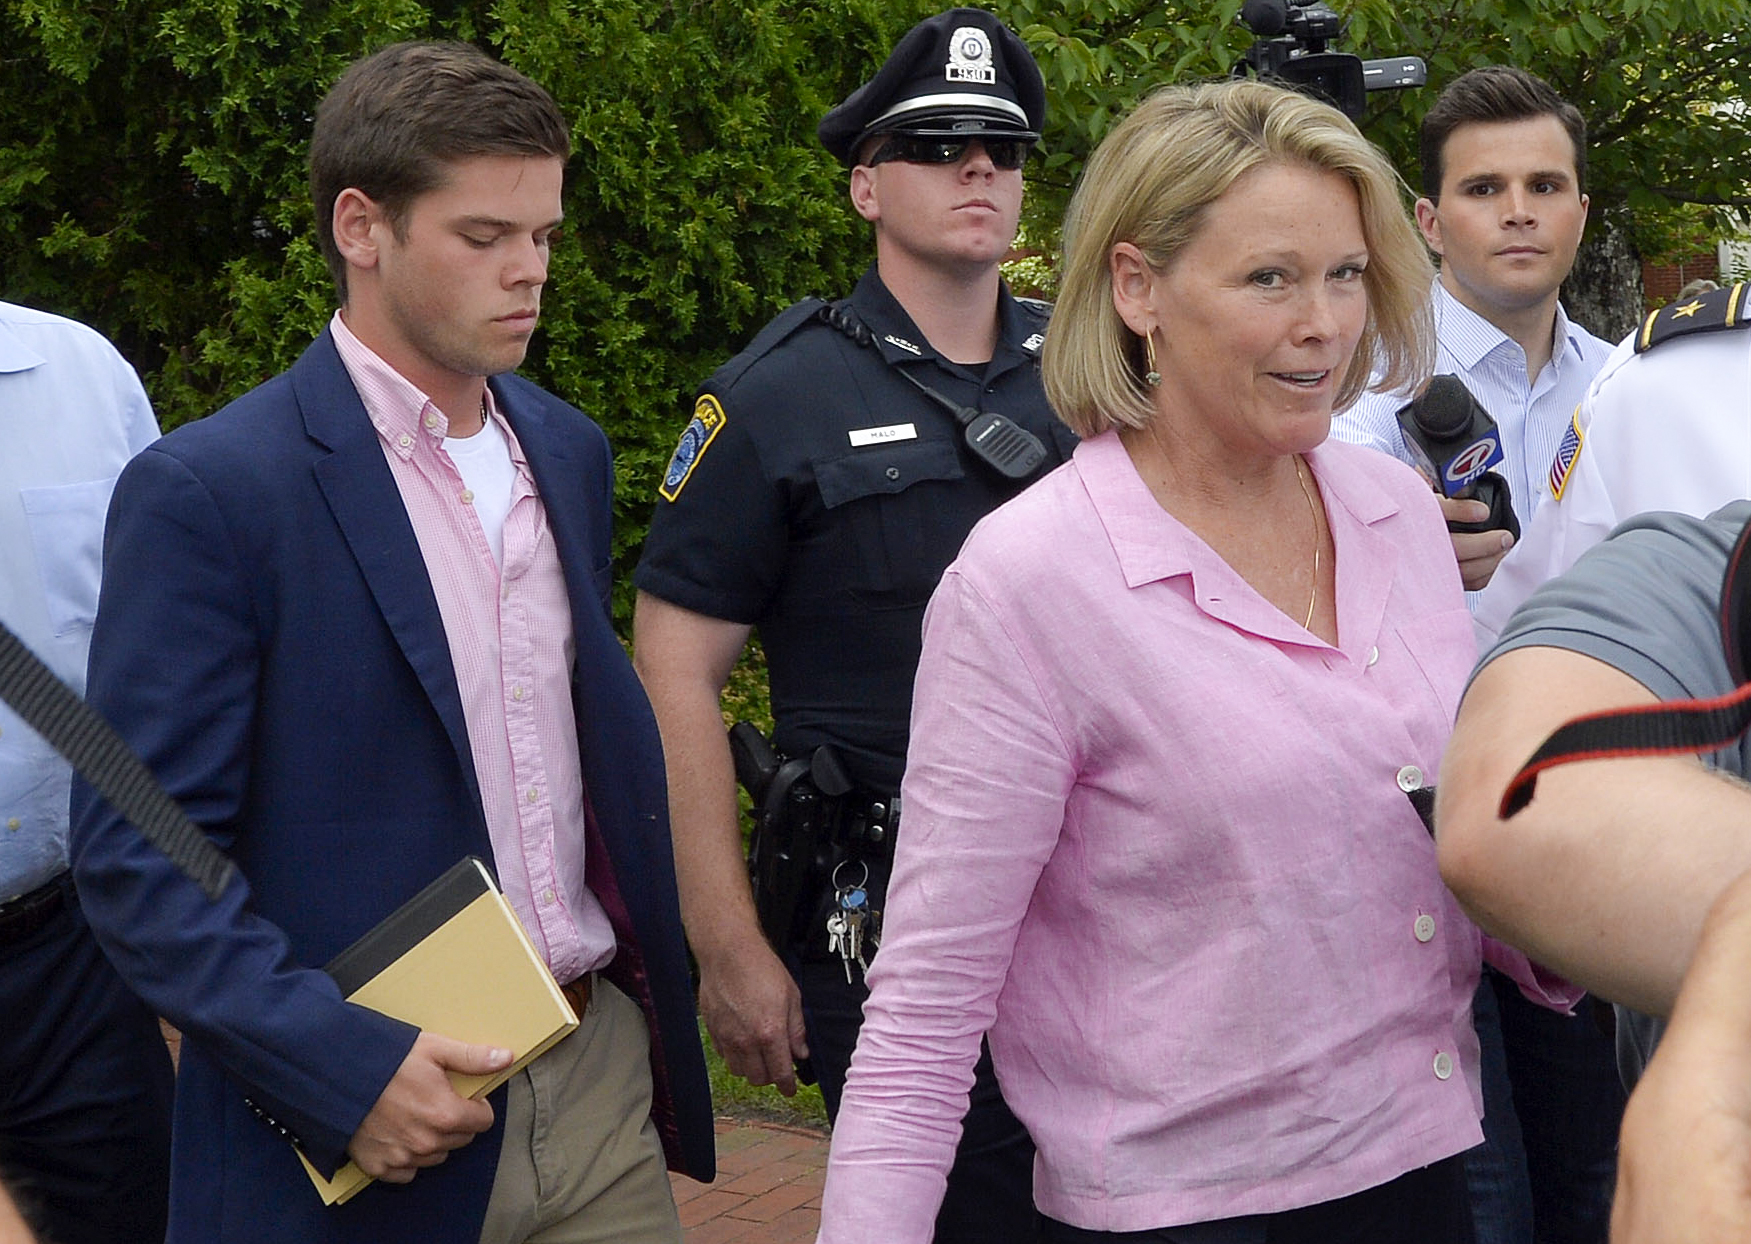 Heather Unruh (R) and her family leave the court house after a pre-trial hearing in the Kevin Spacey sexual assault case at Nantucket District Court in Nantucket, Massachusetts on July 8, 2019. (Photo credit JOSEPH PREZIOSO/AFP/Getty Images)